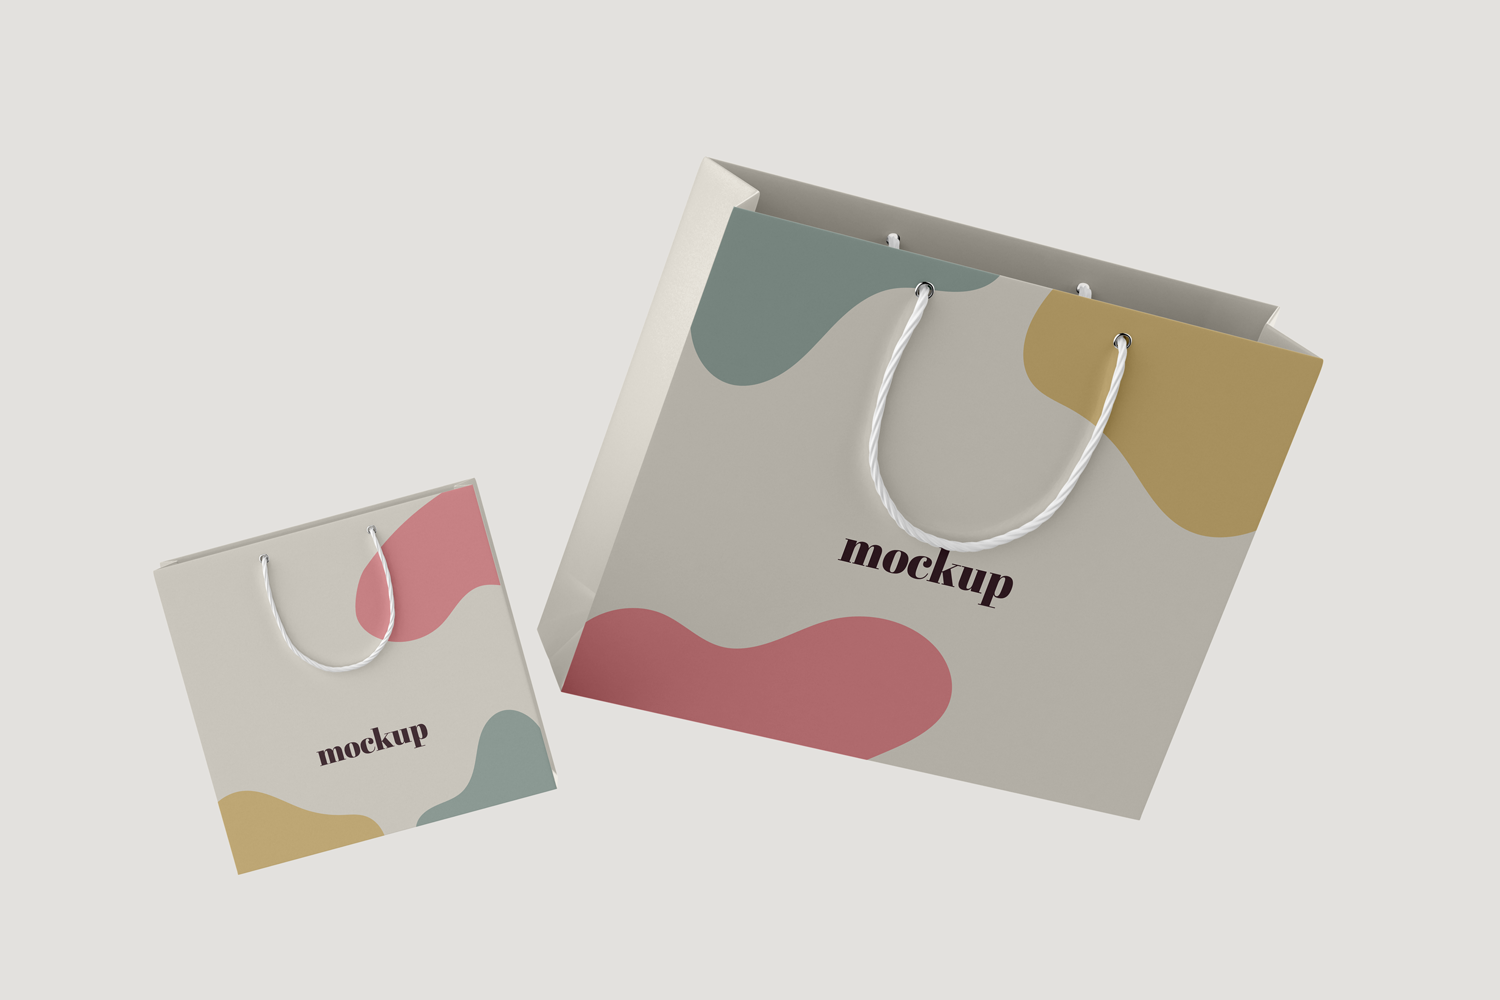 PSD mockup of two stacked shopping bags.
